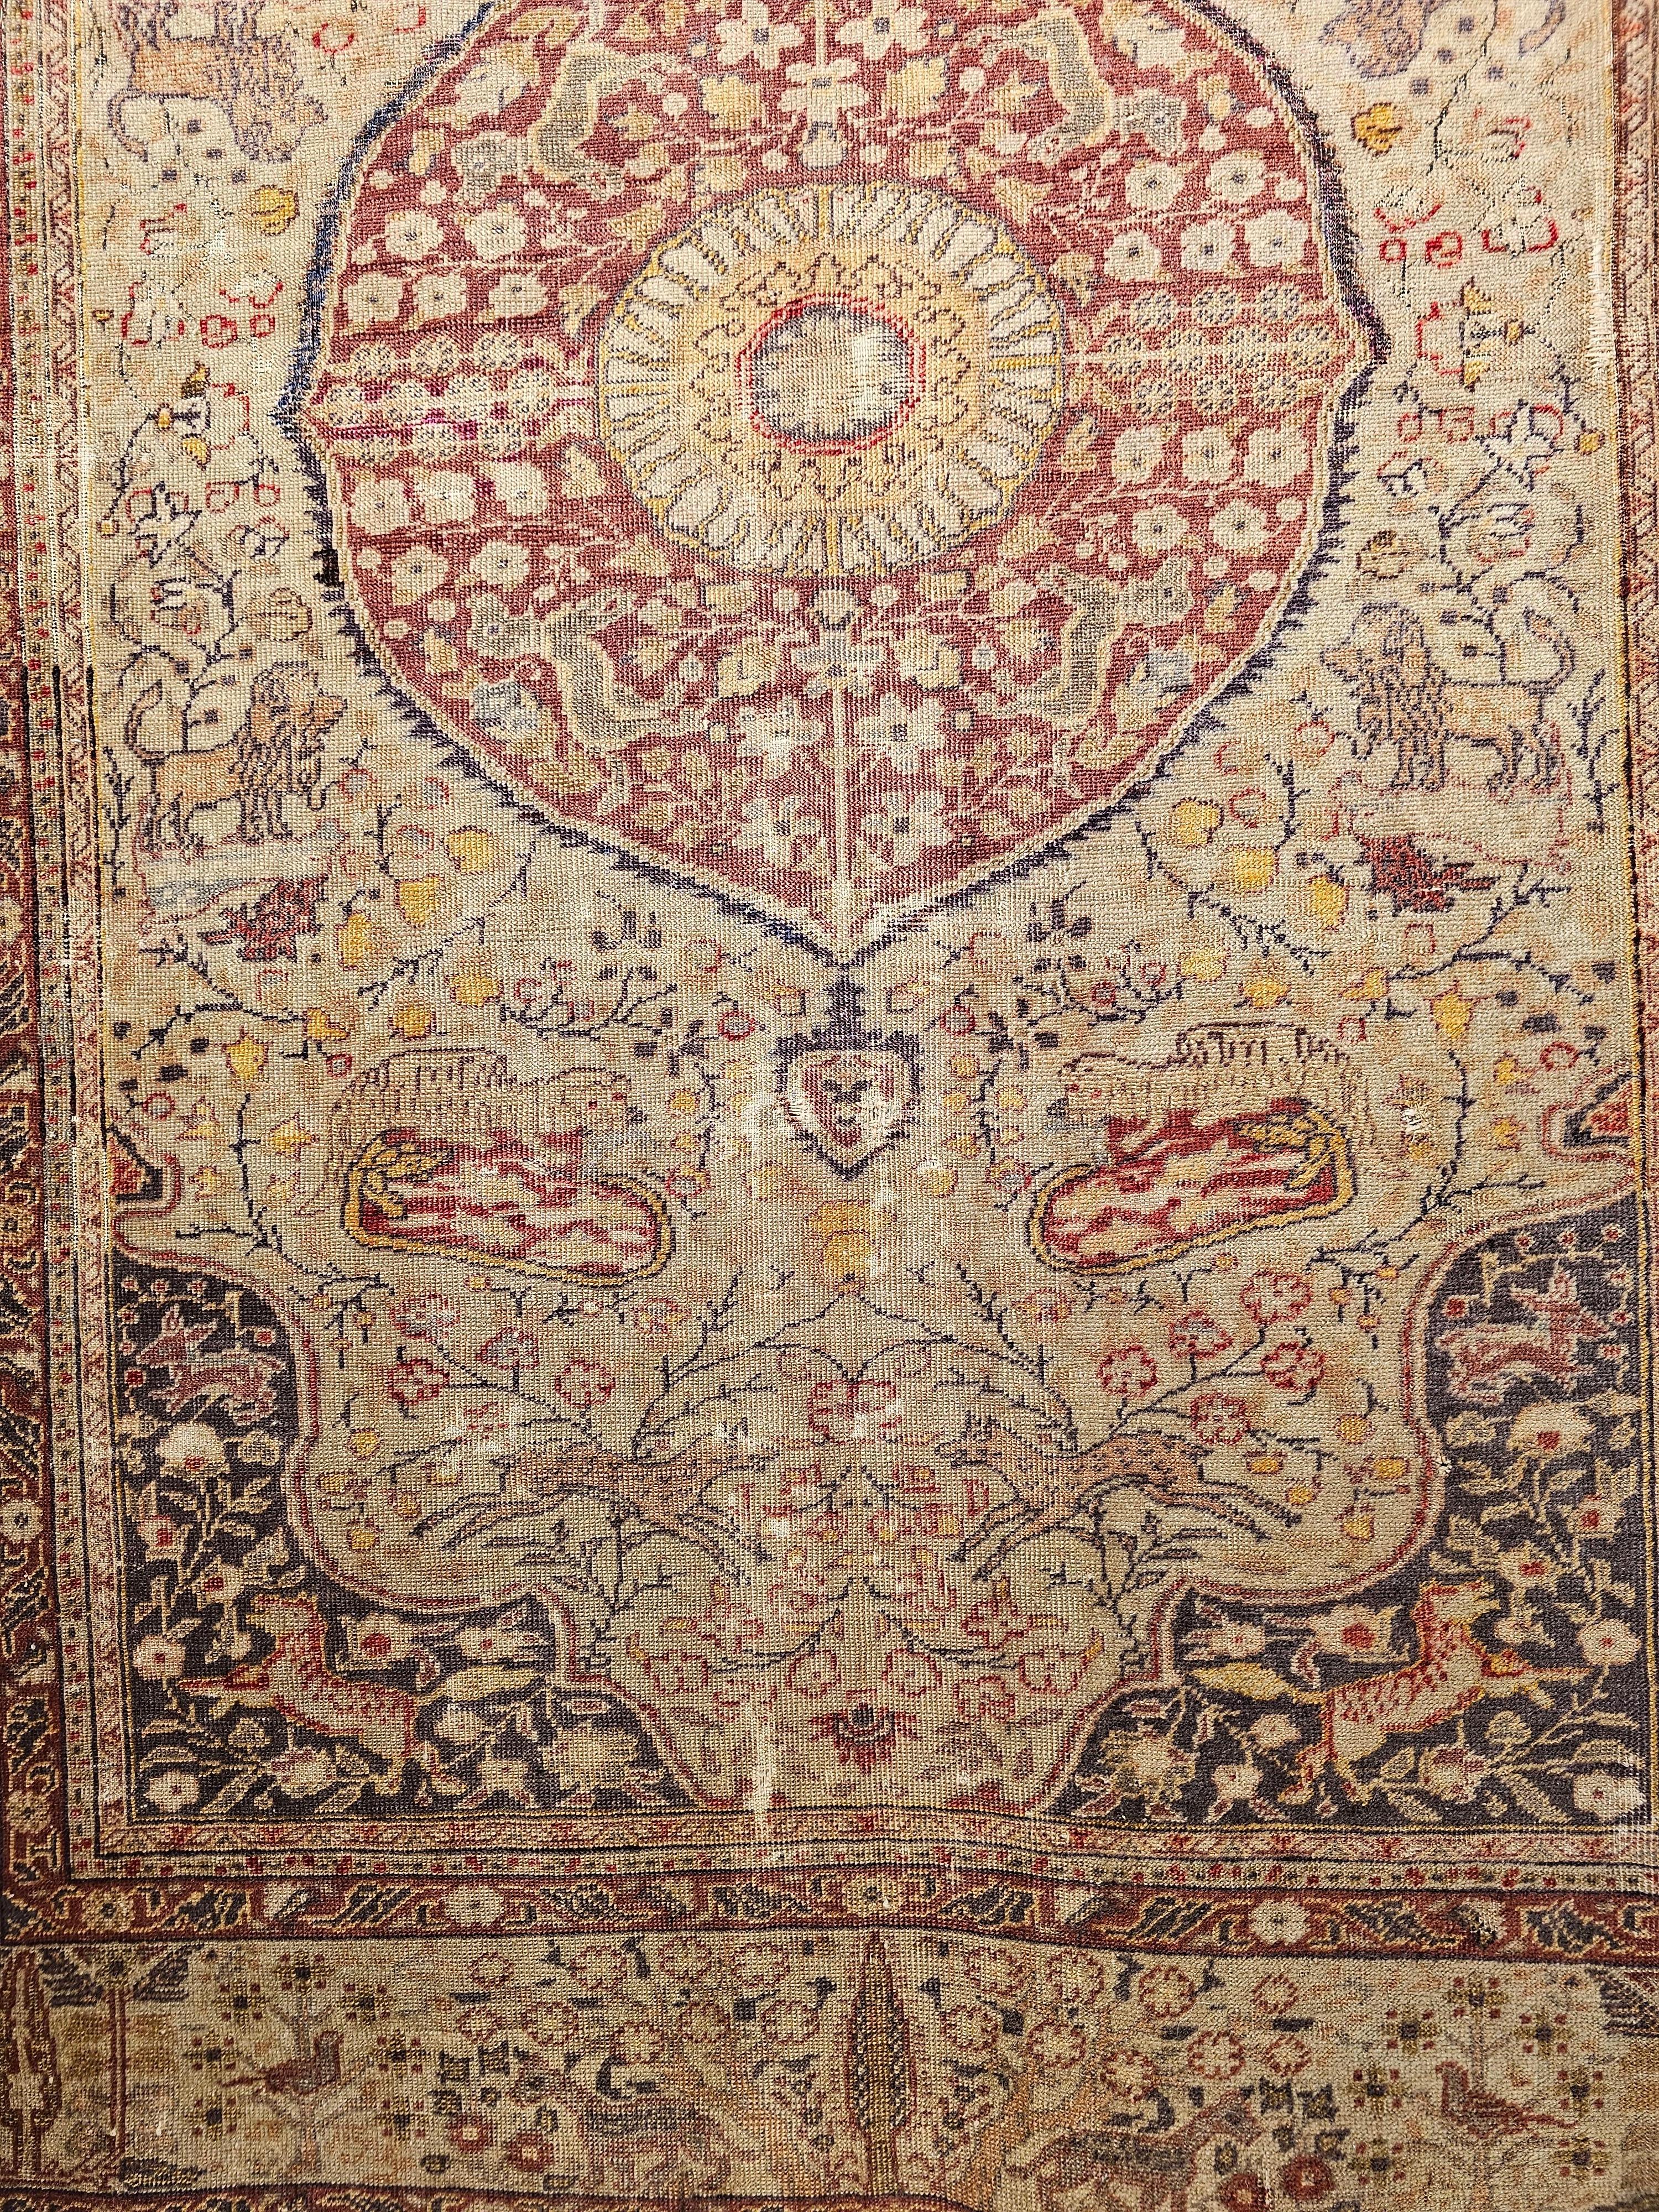 19th Century Turkish Sivas Area Rug with Floral and Fauna Design in camel, red, and lavender colors.  The rug is in the garden design with animal figures including deer, lion, and birds.  The overall design is simplistic but very charming.  The